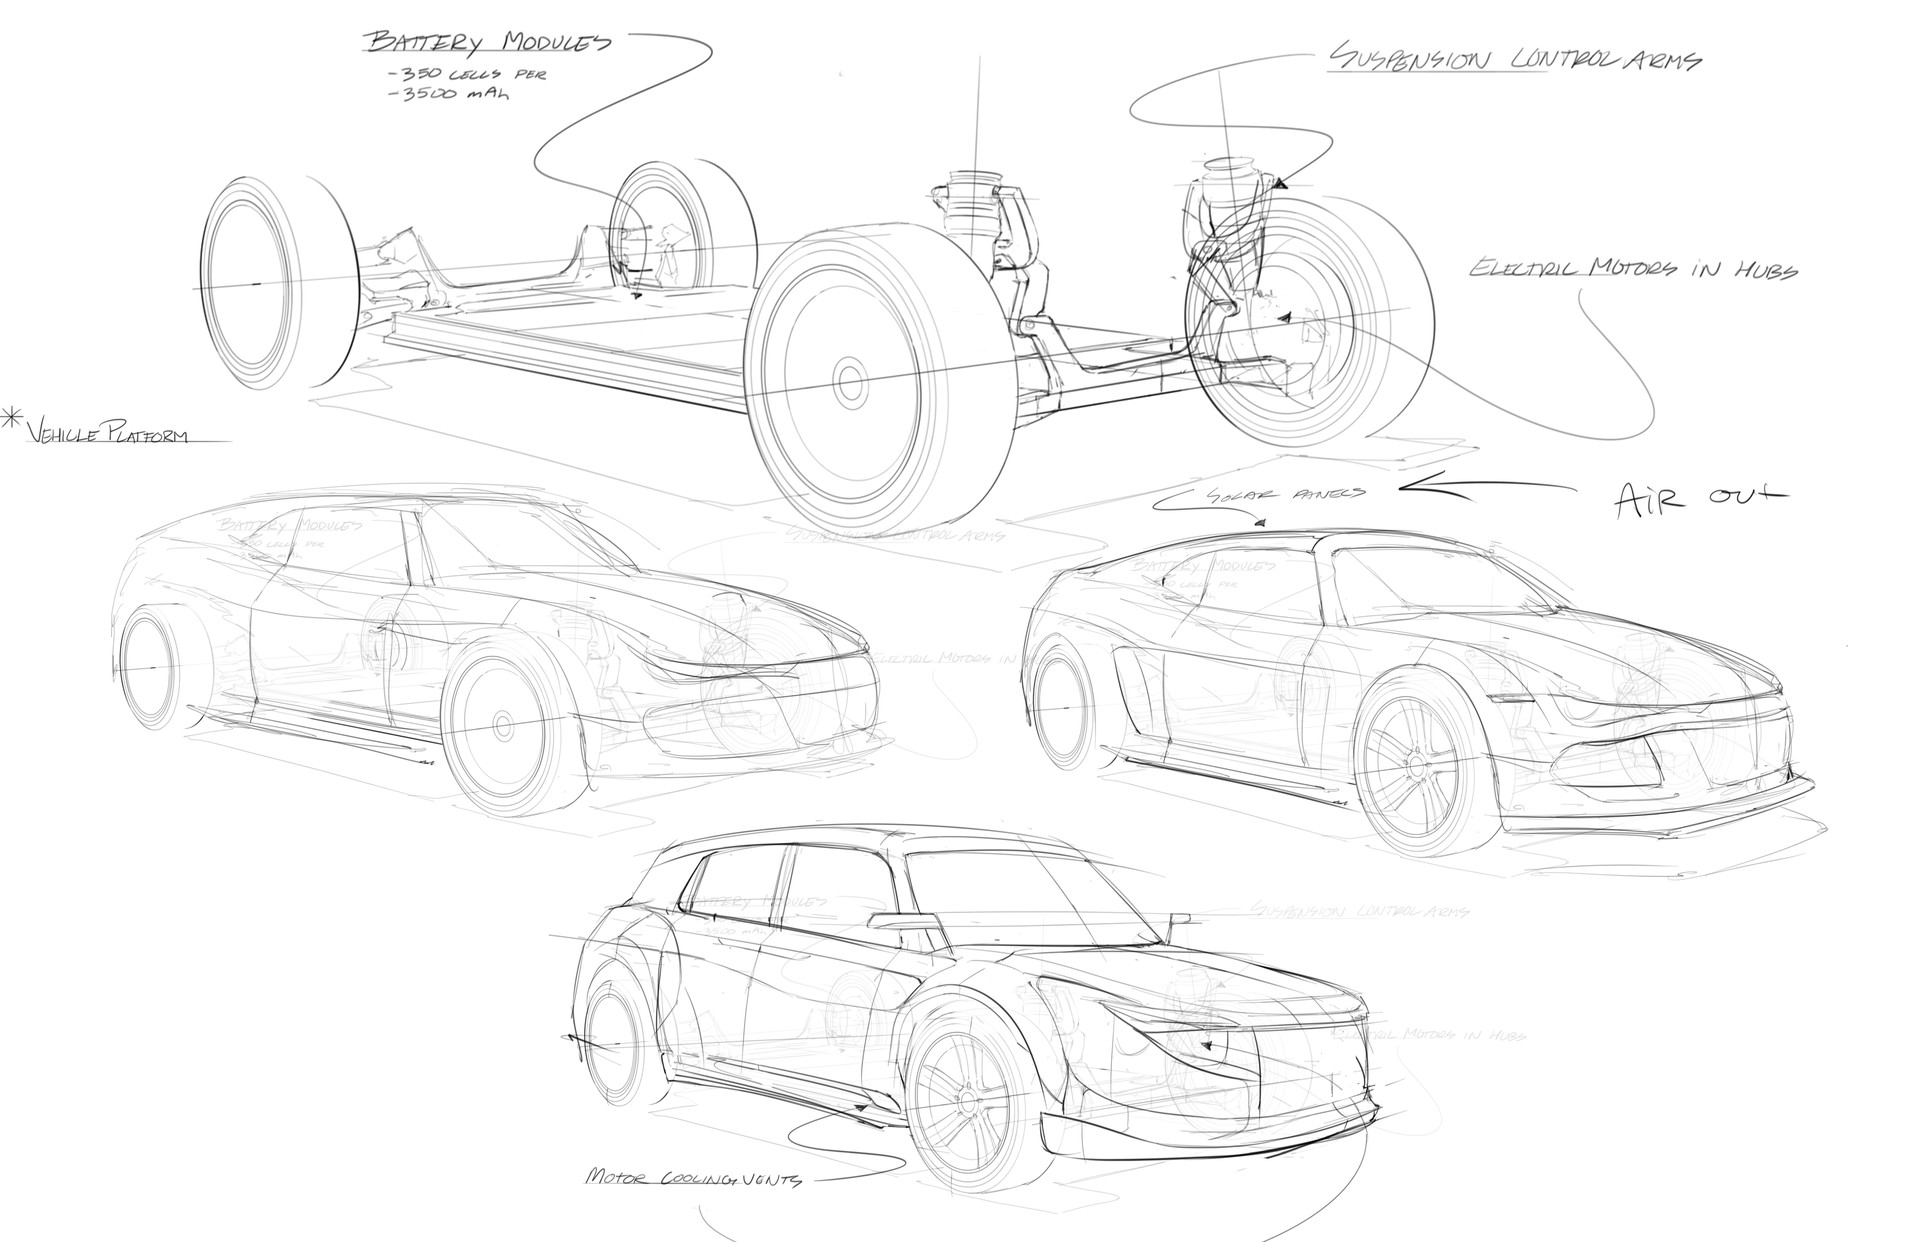 Future VW electric-car concepts revealed in patent drawings